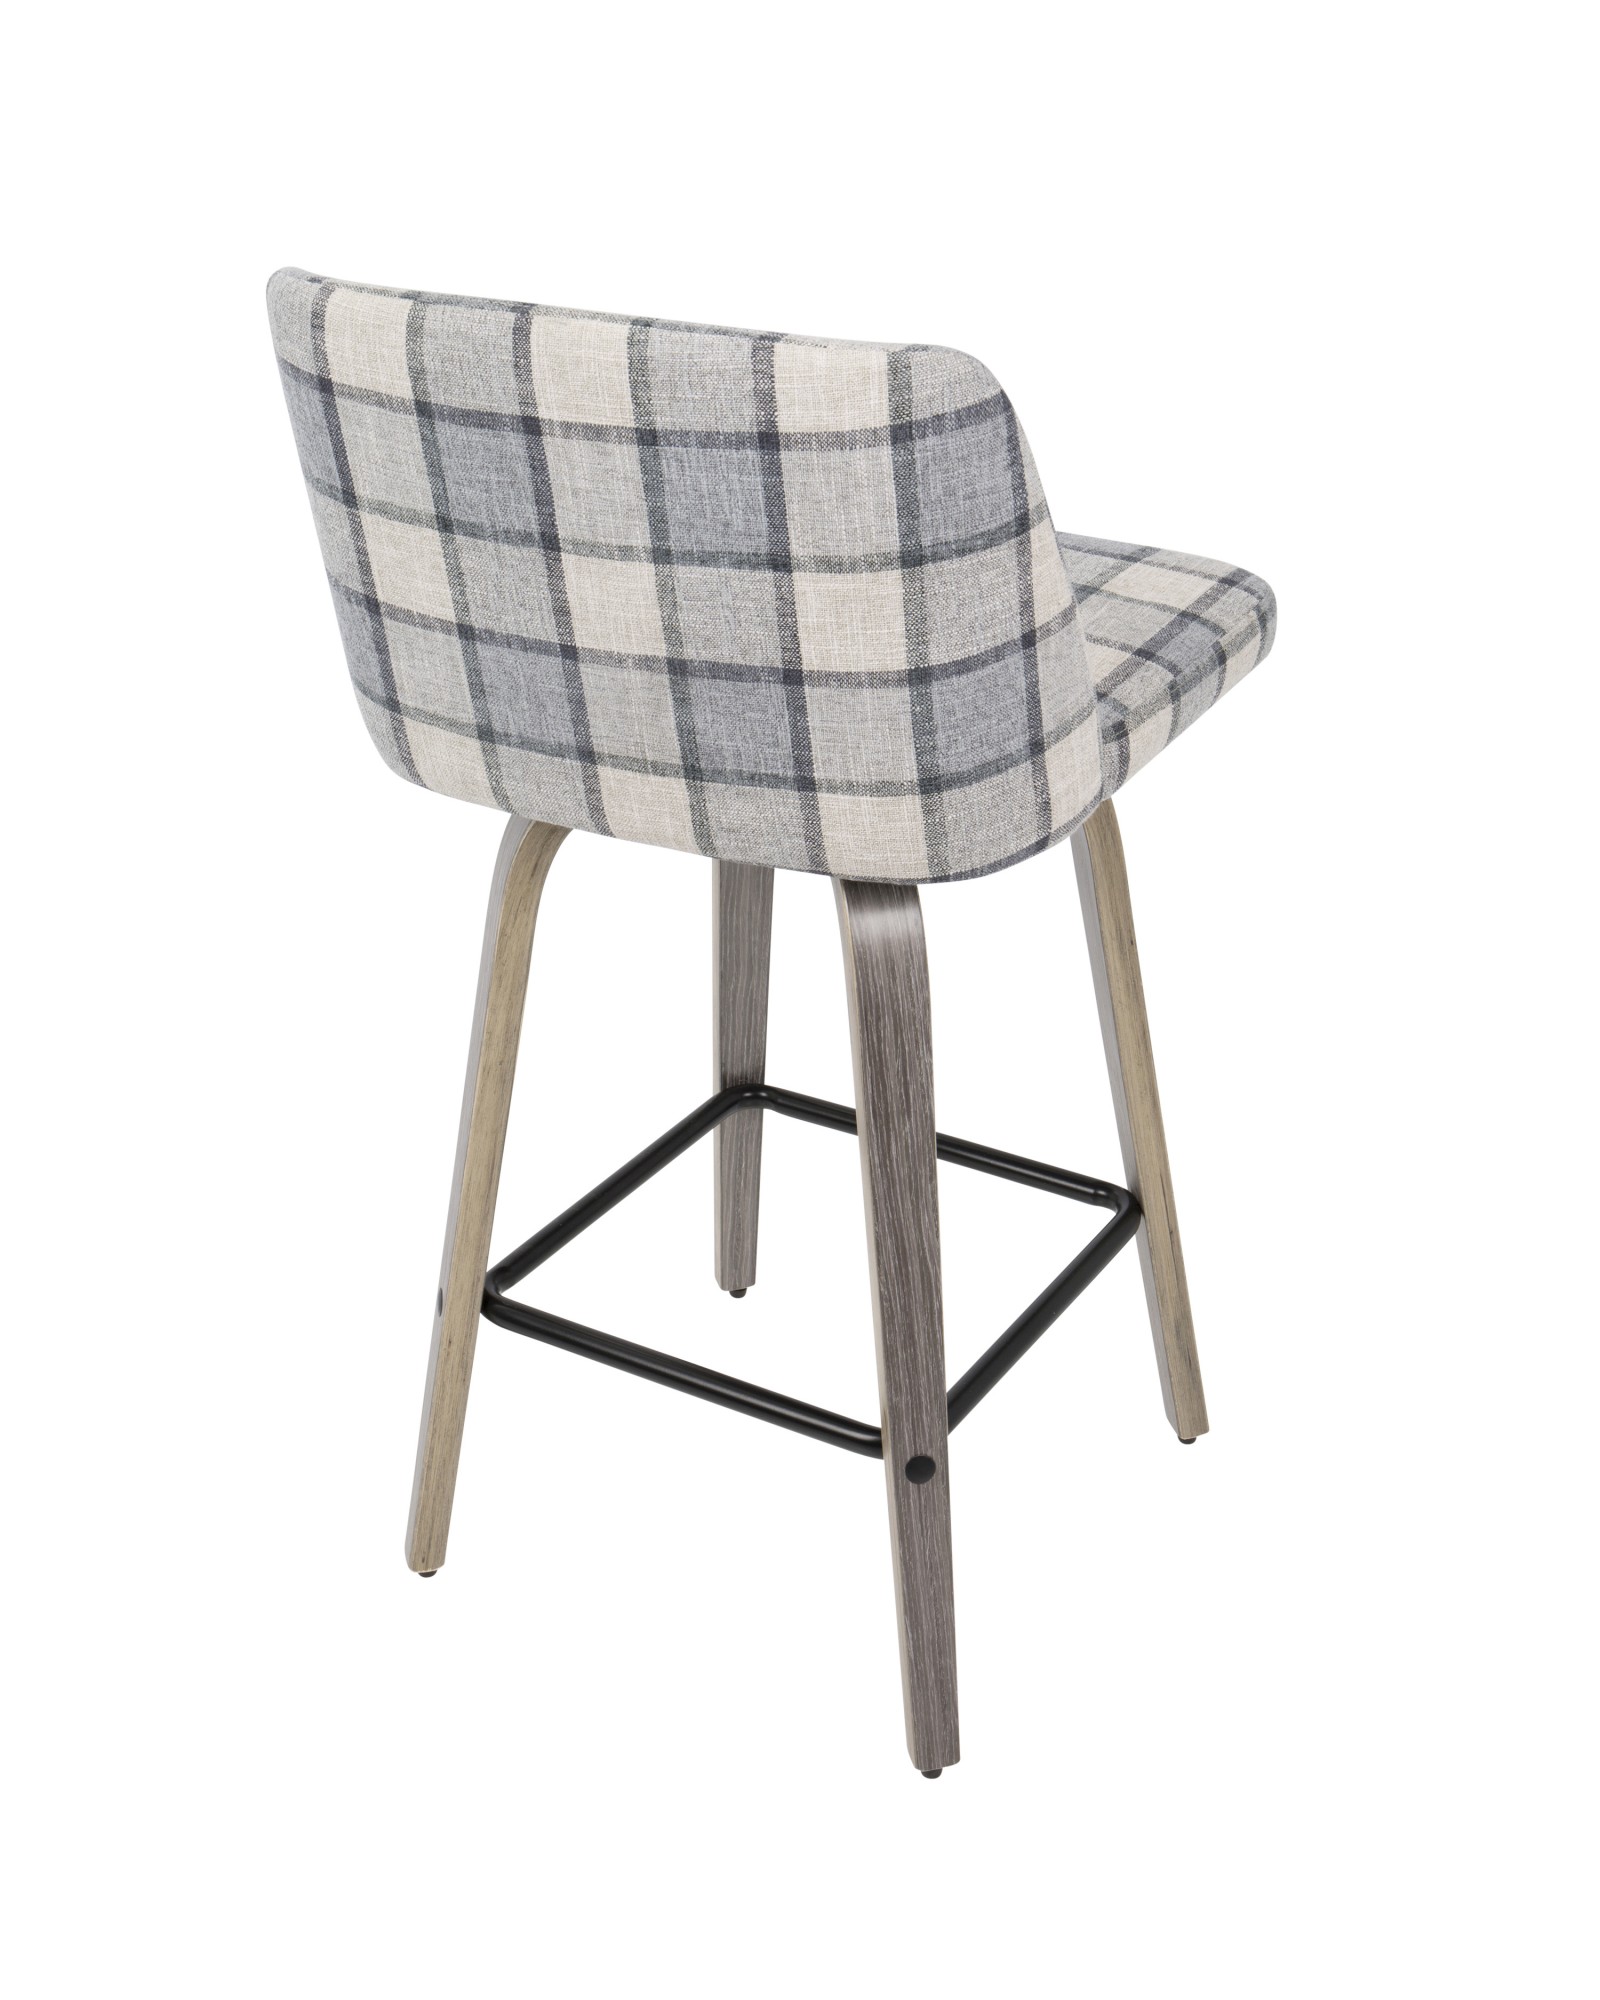 Toriano Mid-Century Modern Counter Stool in Light Grey Wood and Grey Plaid